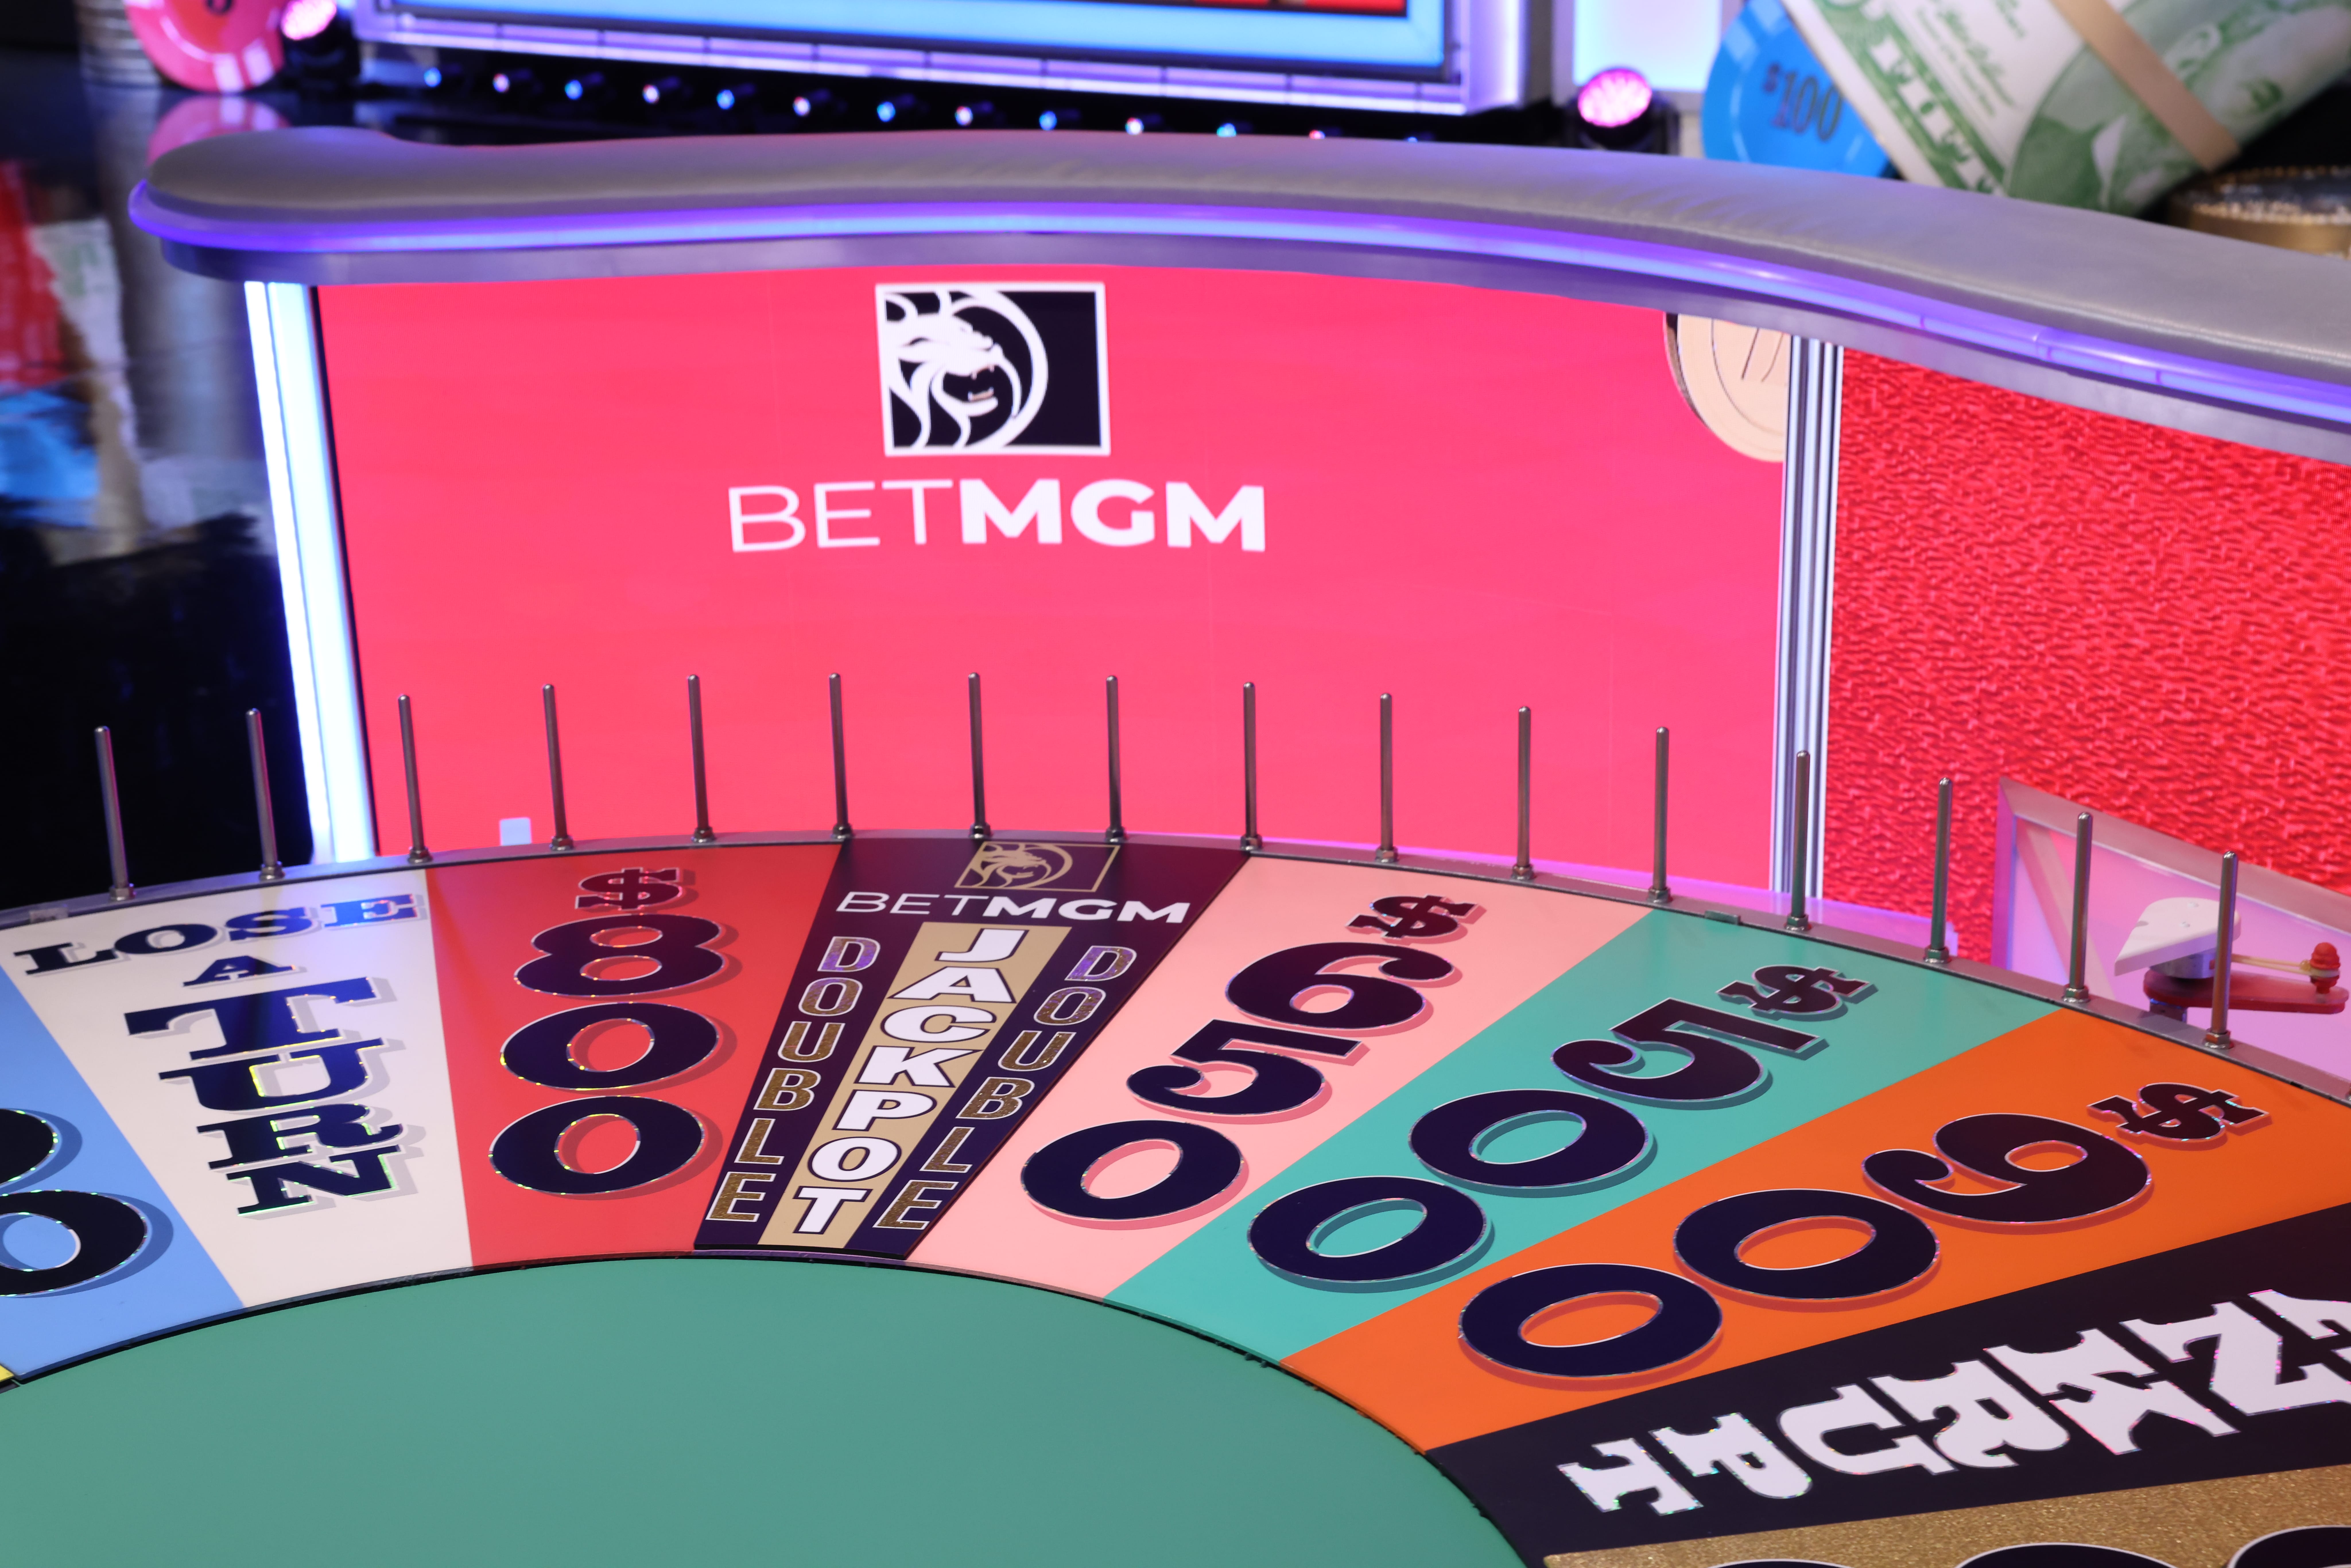 BetMGM Big Money Week on Wheel of Fortune lets fans interact with the iconic TV show and the online casino platform.